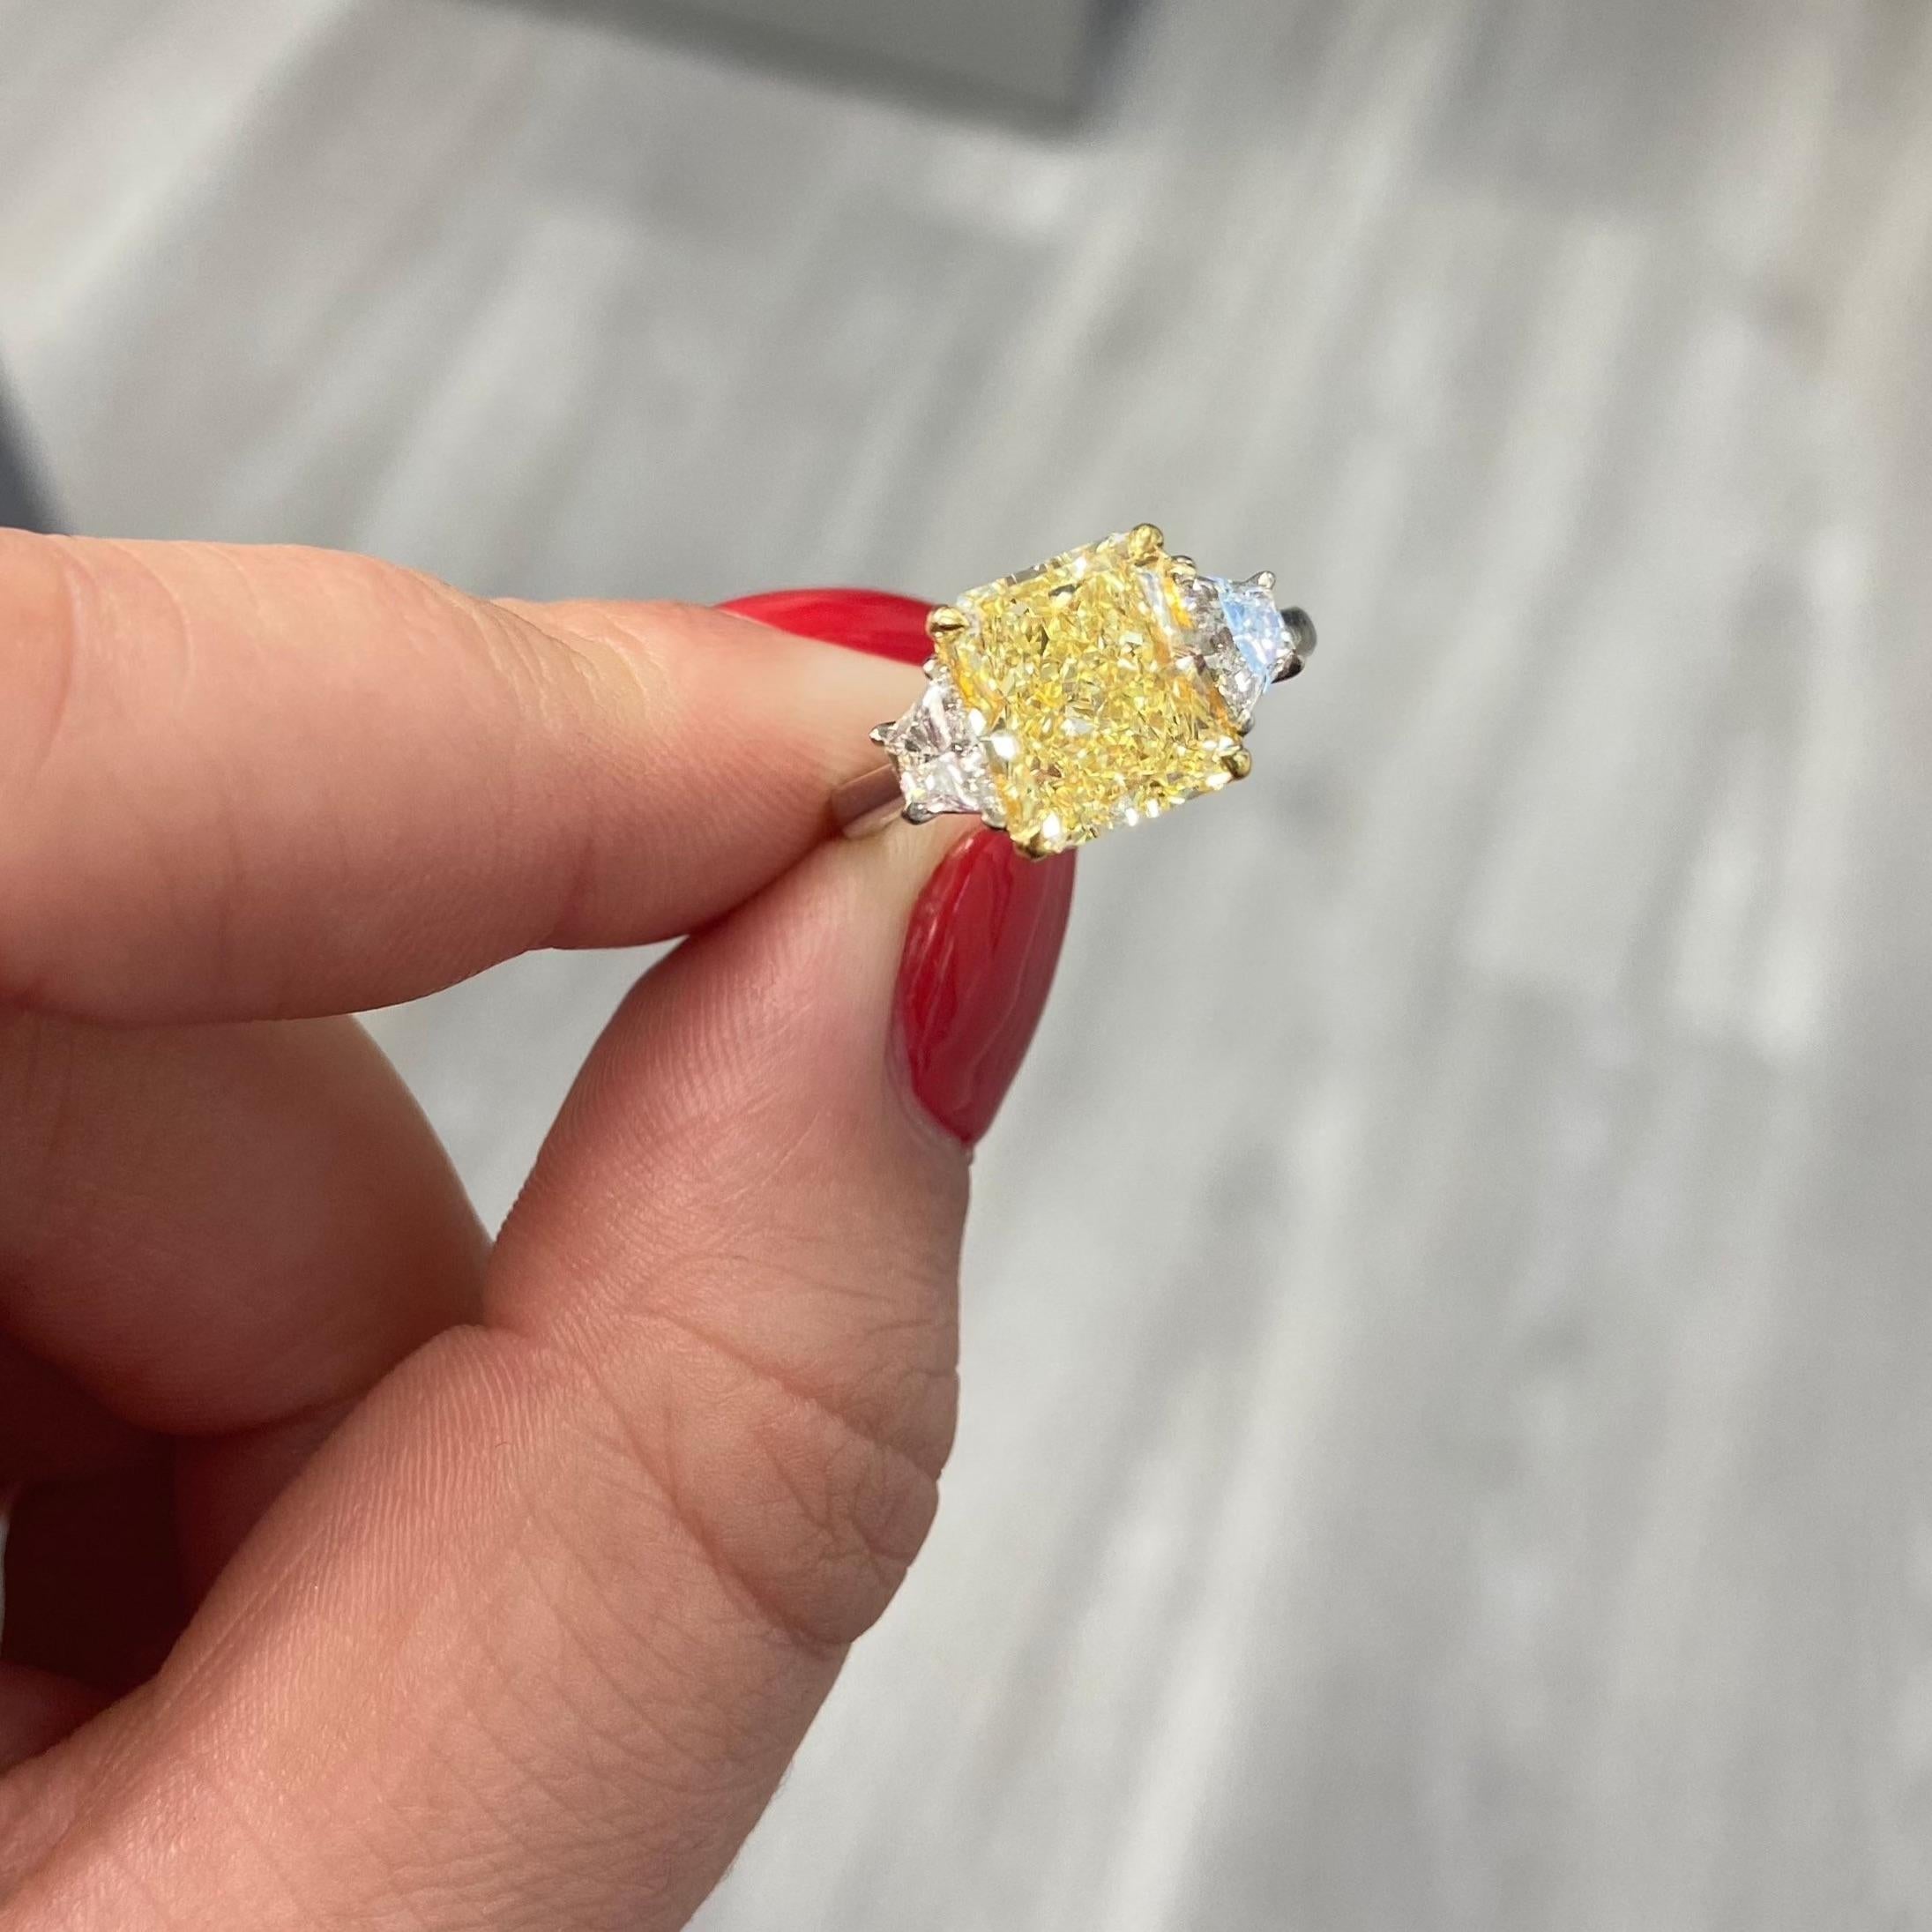 Super crisp and gorgeous diamond. Positively on fire, no dead spots of color, just an extremely beautiful diamond.

3.96 Carat Fancy Yellow
SI1 Clarity
Radiant Cut
Excellent/Very Good cutting
Faint Fluorescence
Handmade in NYC
Set in Platinum &